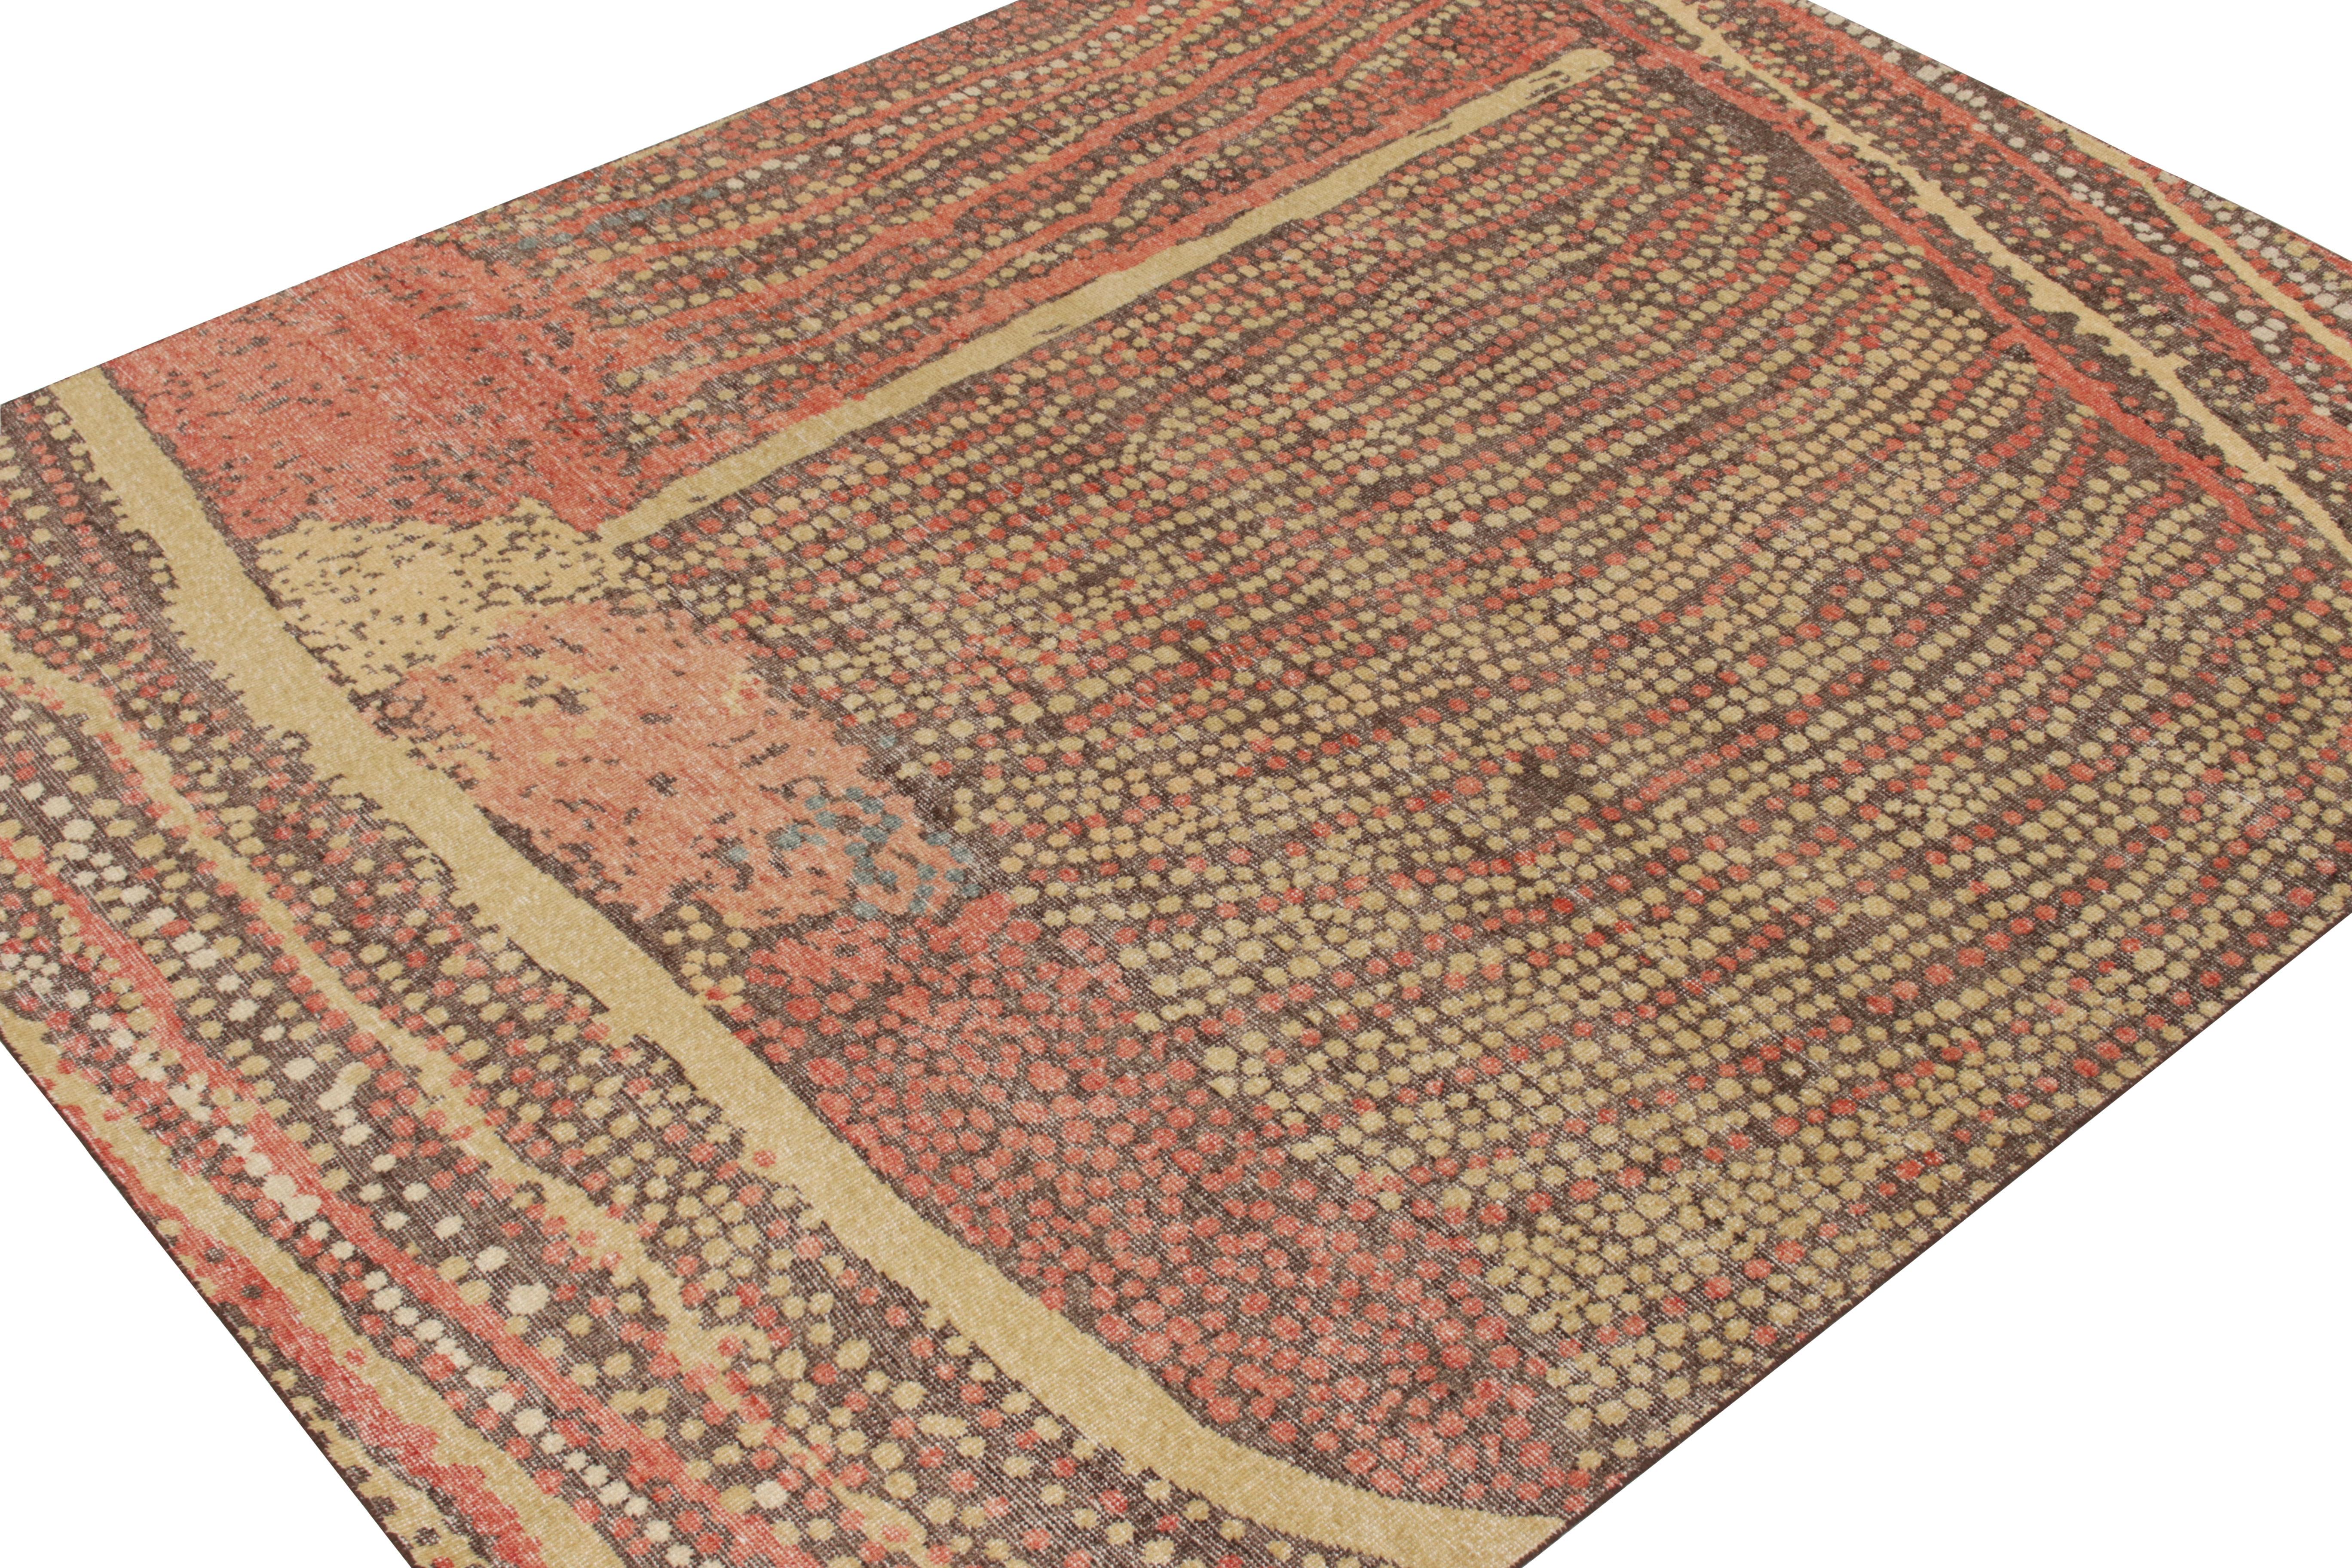 Indian Rug & Kilim's Distressed Style Modern Rug in Beige-Brown, Red Abstract Pattern For Sale